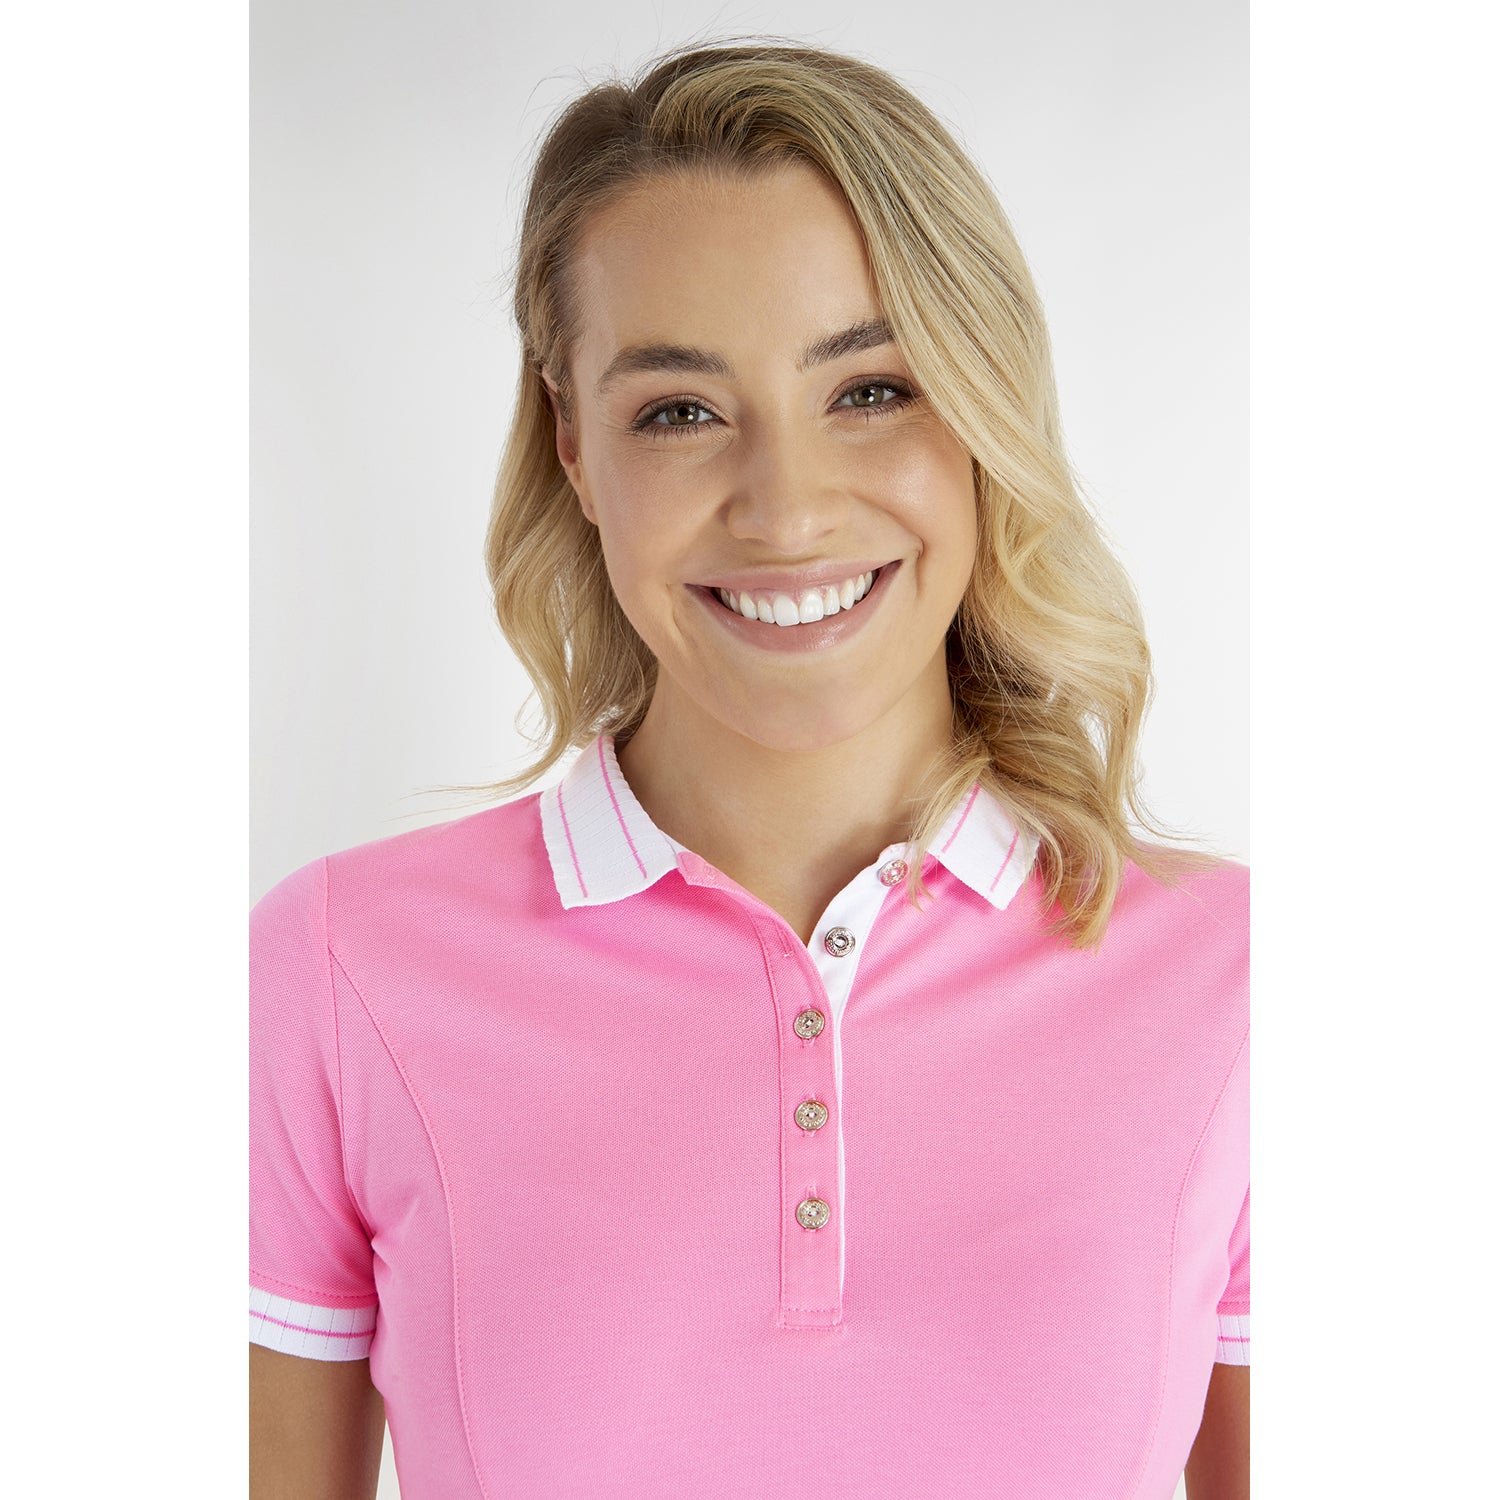 Green Lamb Ladies Organic Cotton Short Sleeve Club Polo in Candy